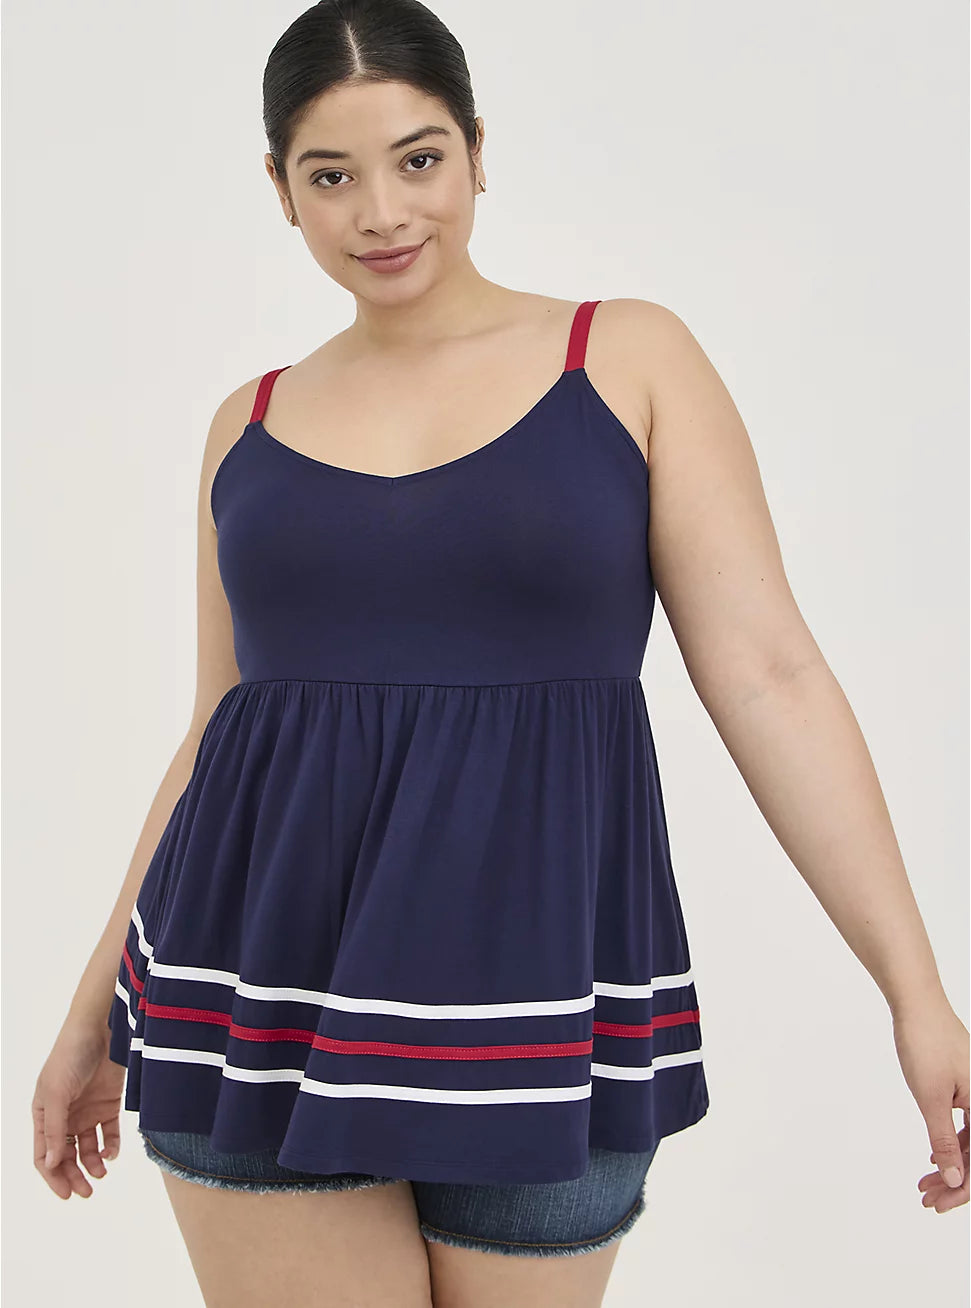 Torrid Babydoll Navy Blue and Red Sleeveless Top NWT - 3XL – Le